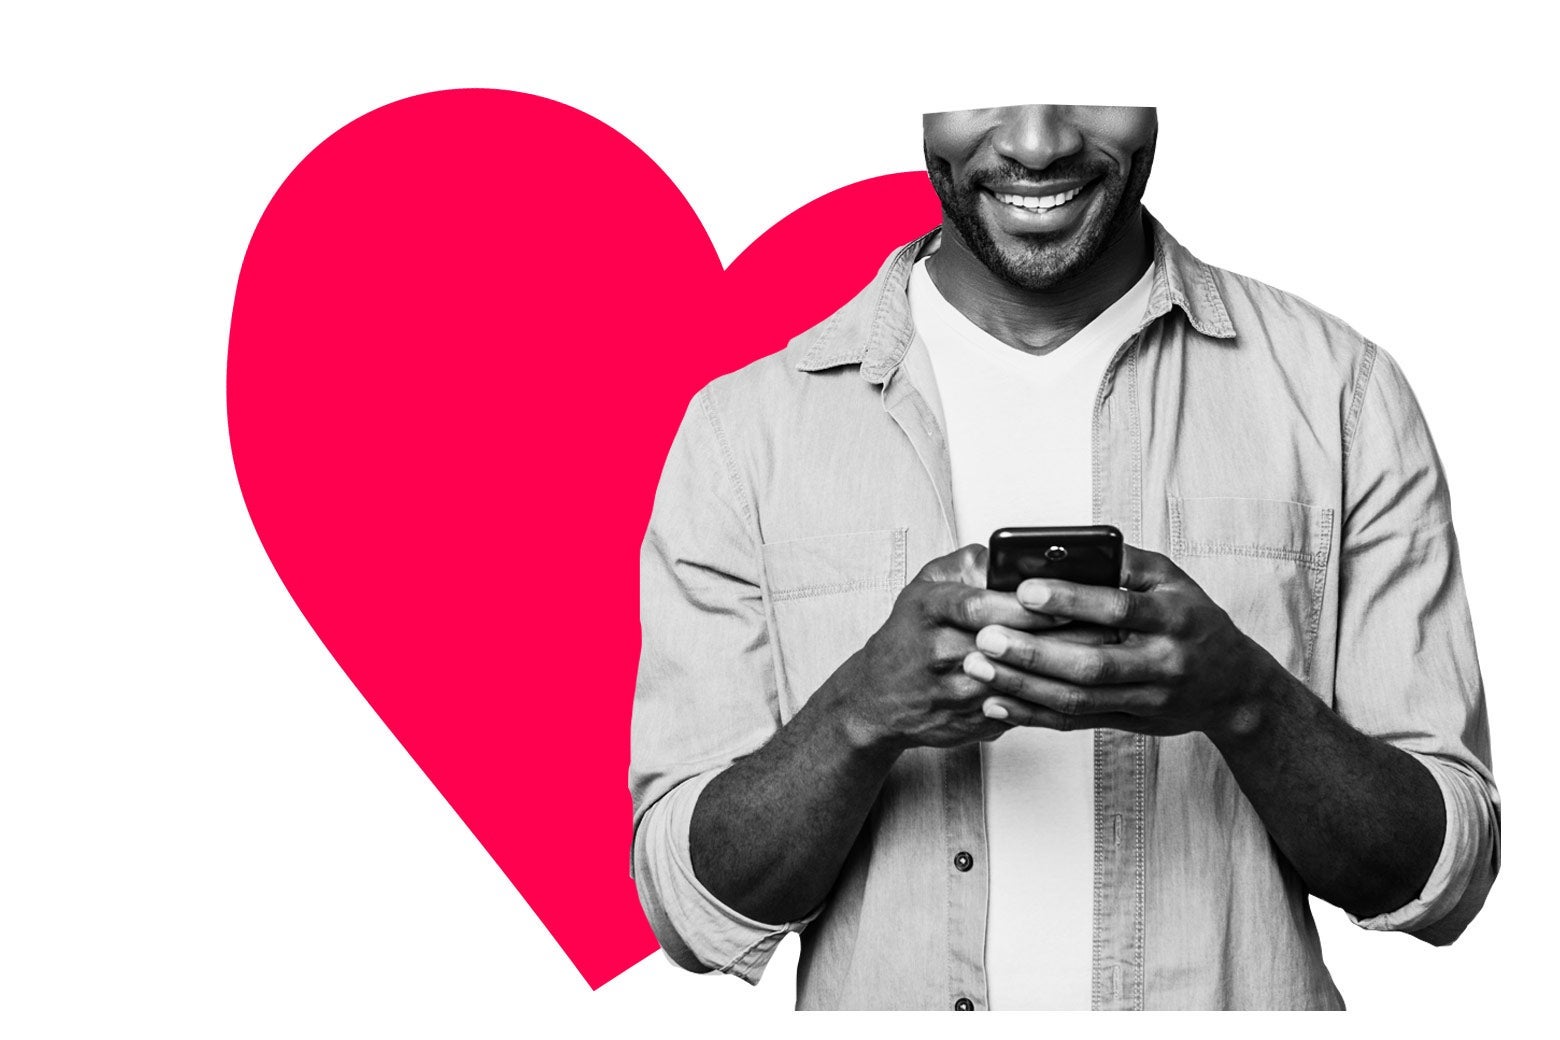 Smiling man typing on his phone, with a graphic of a heart behind him.